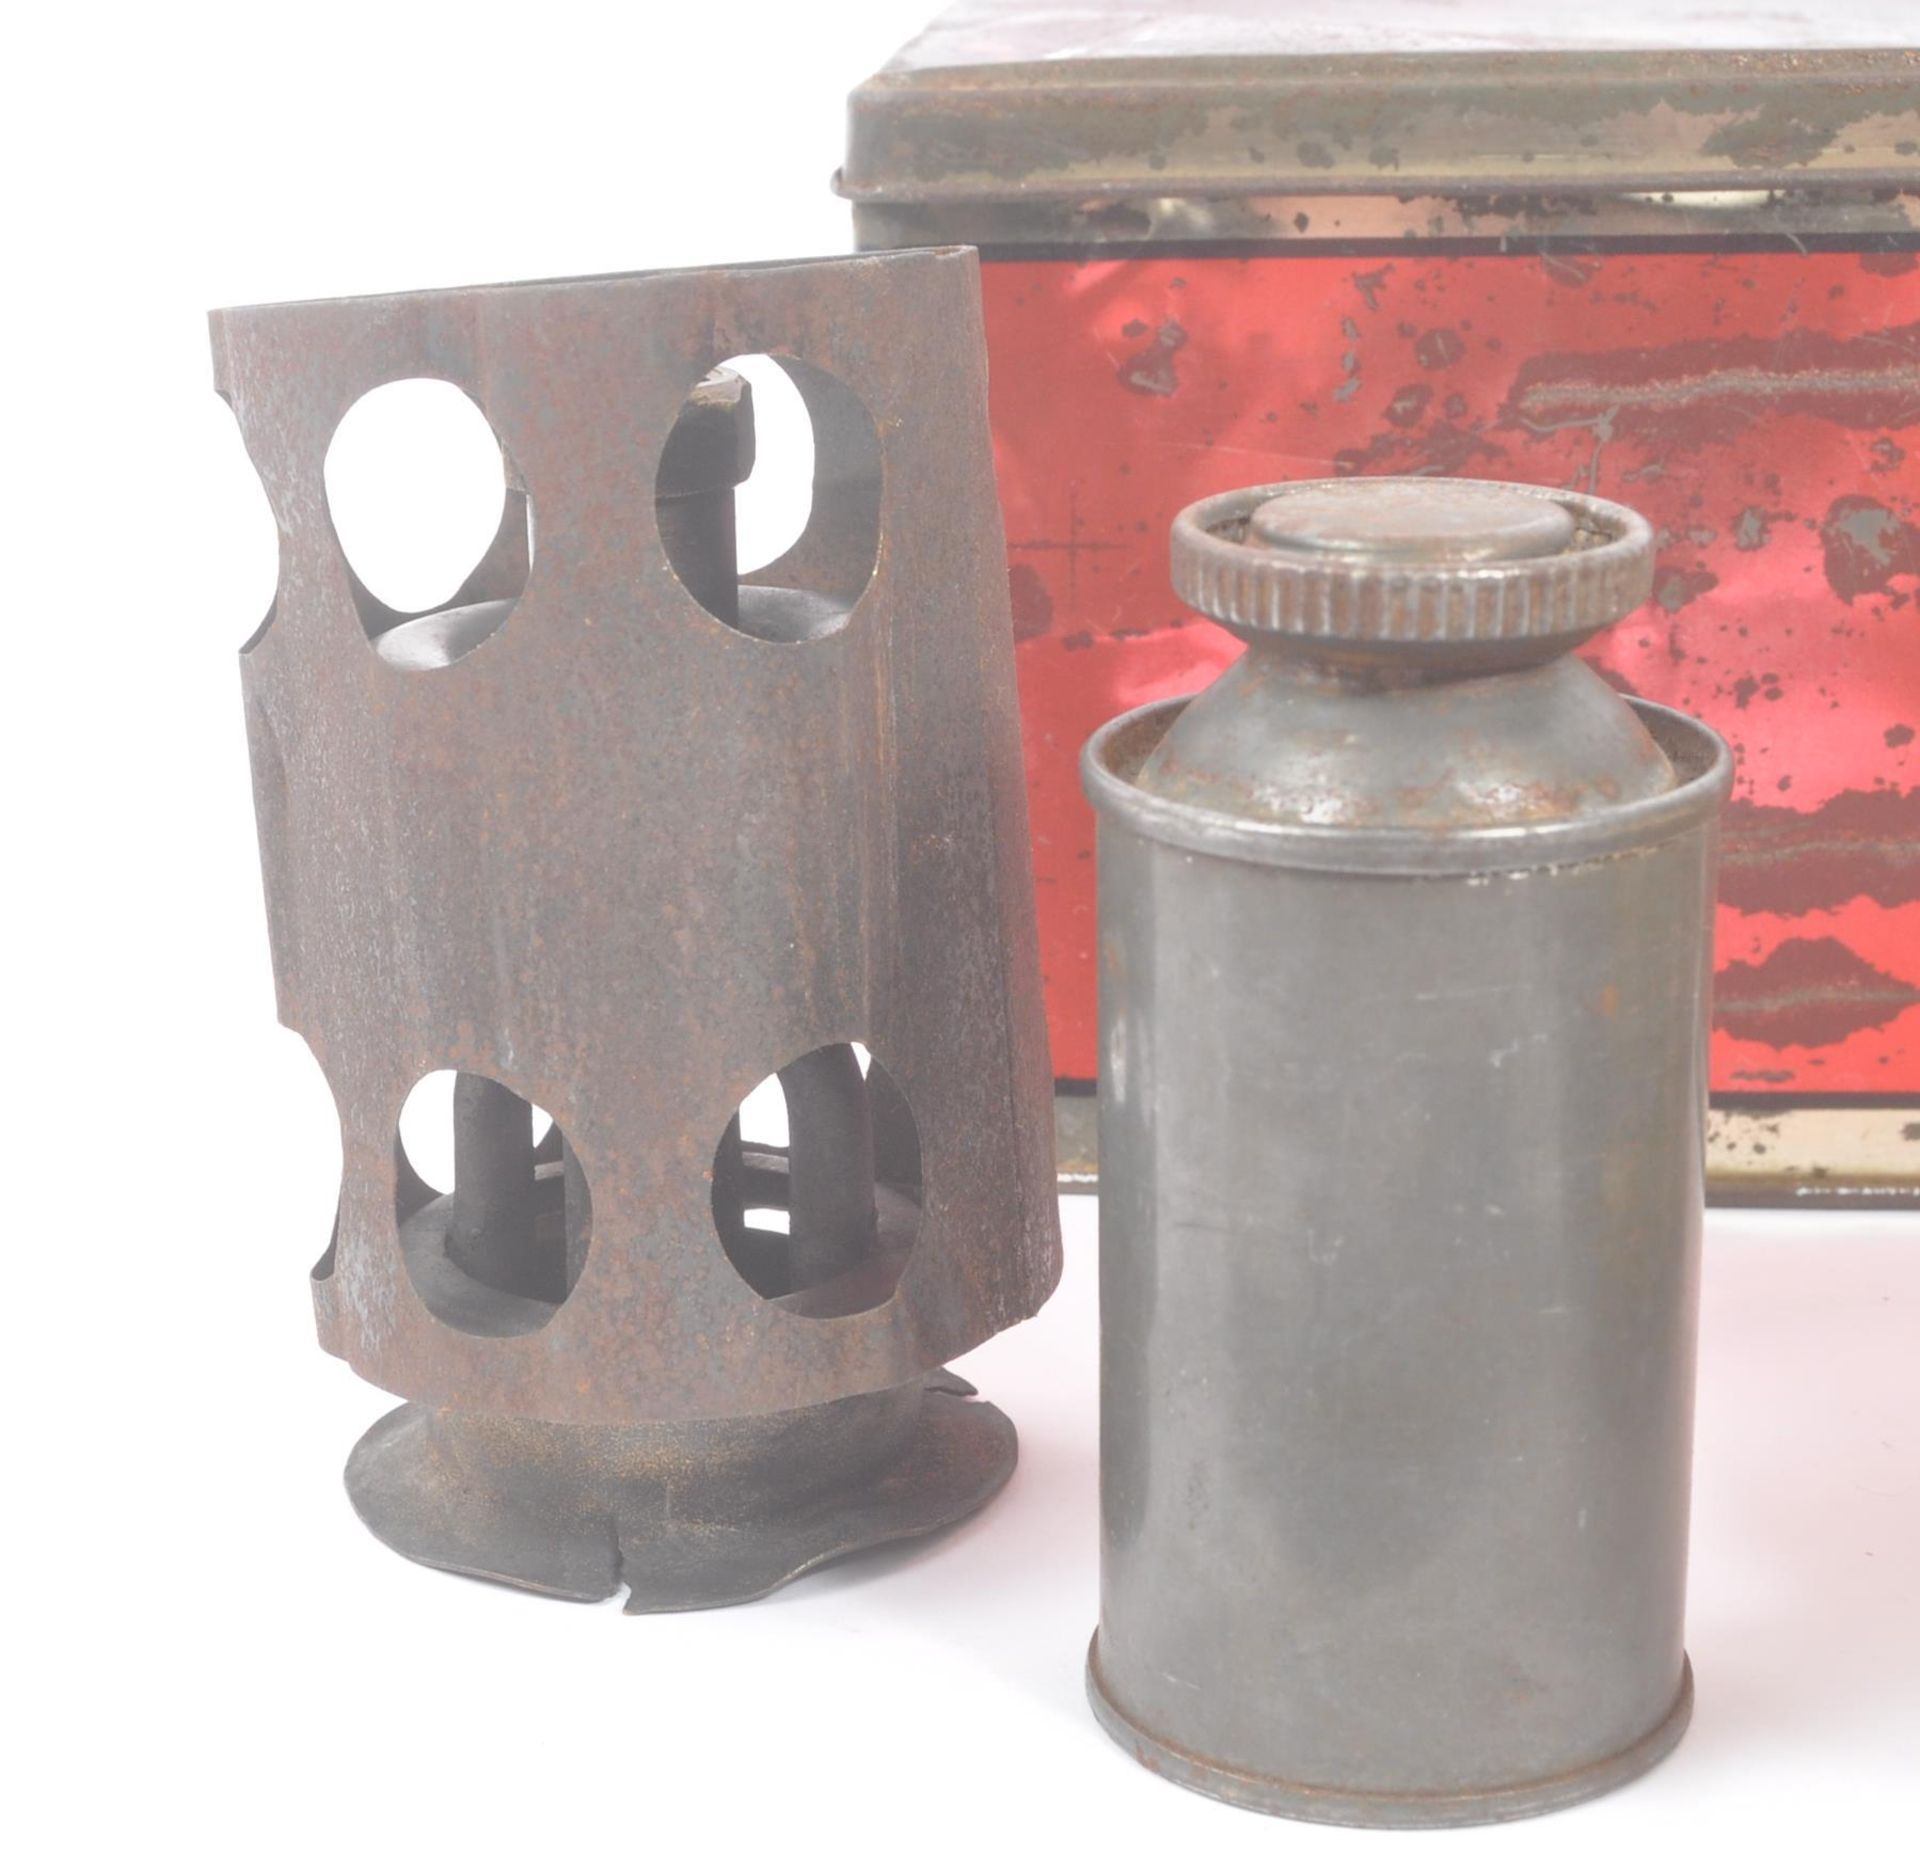 PRIMUS - EARLY 20TH CENTURY NO. 210 STOVE - Image 3 of 5